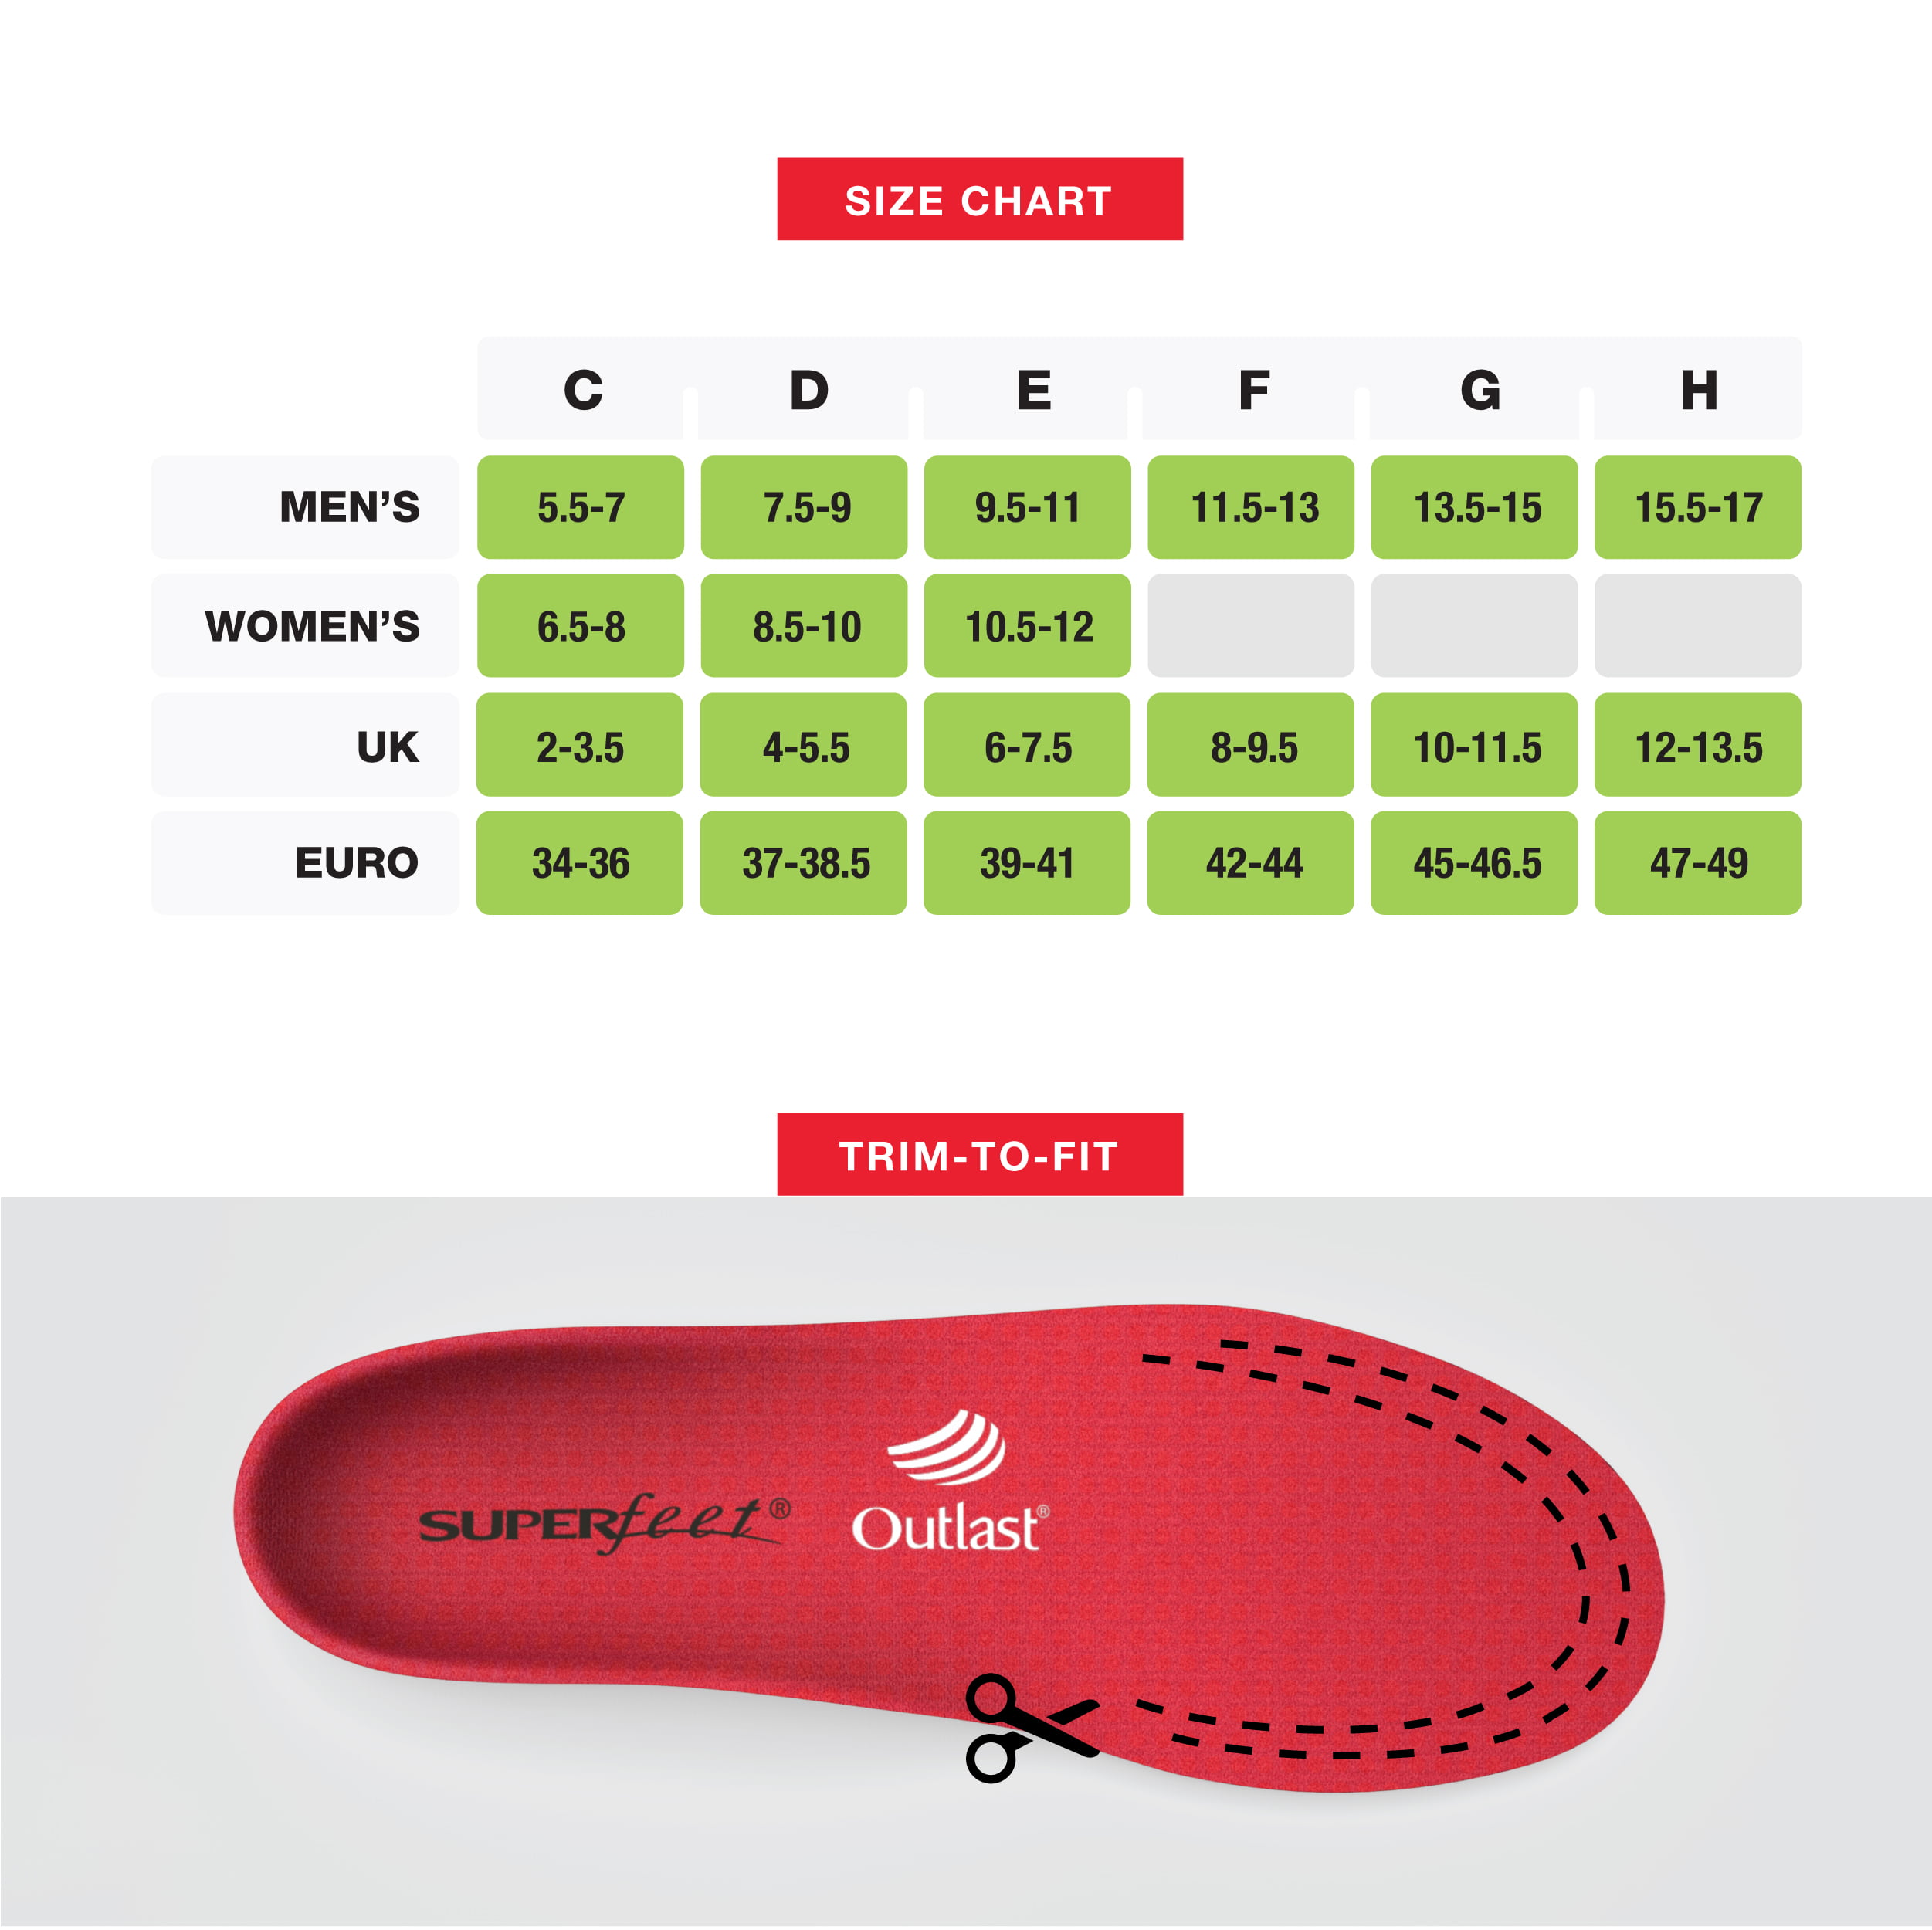 superfeet redhot insoles